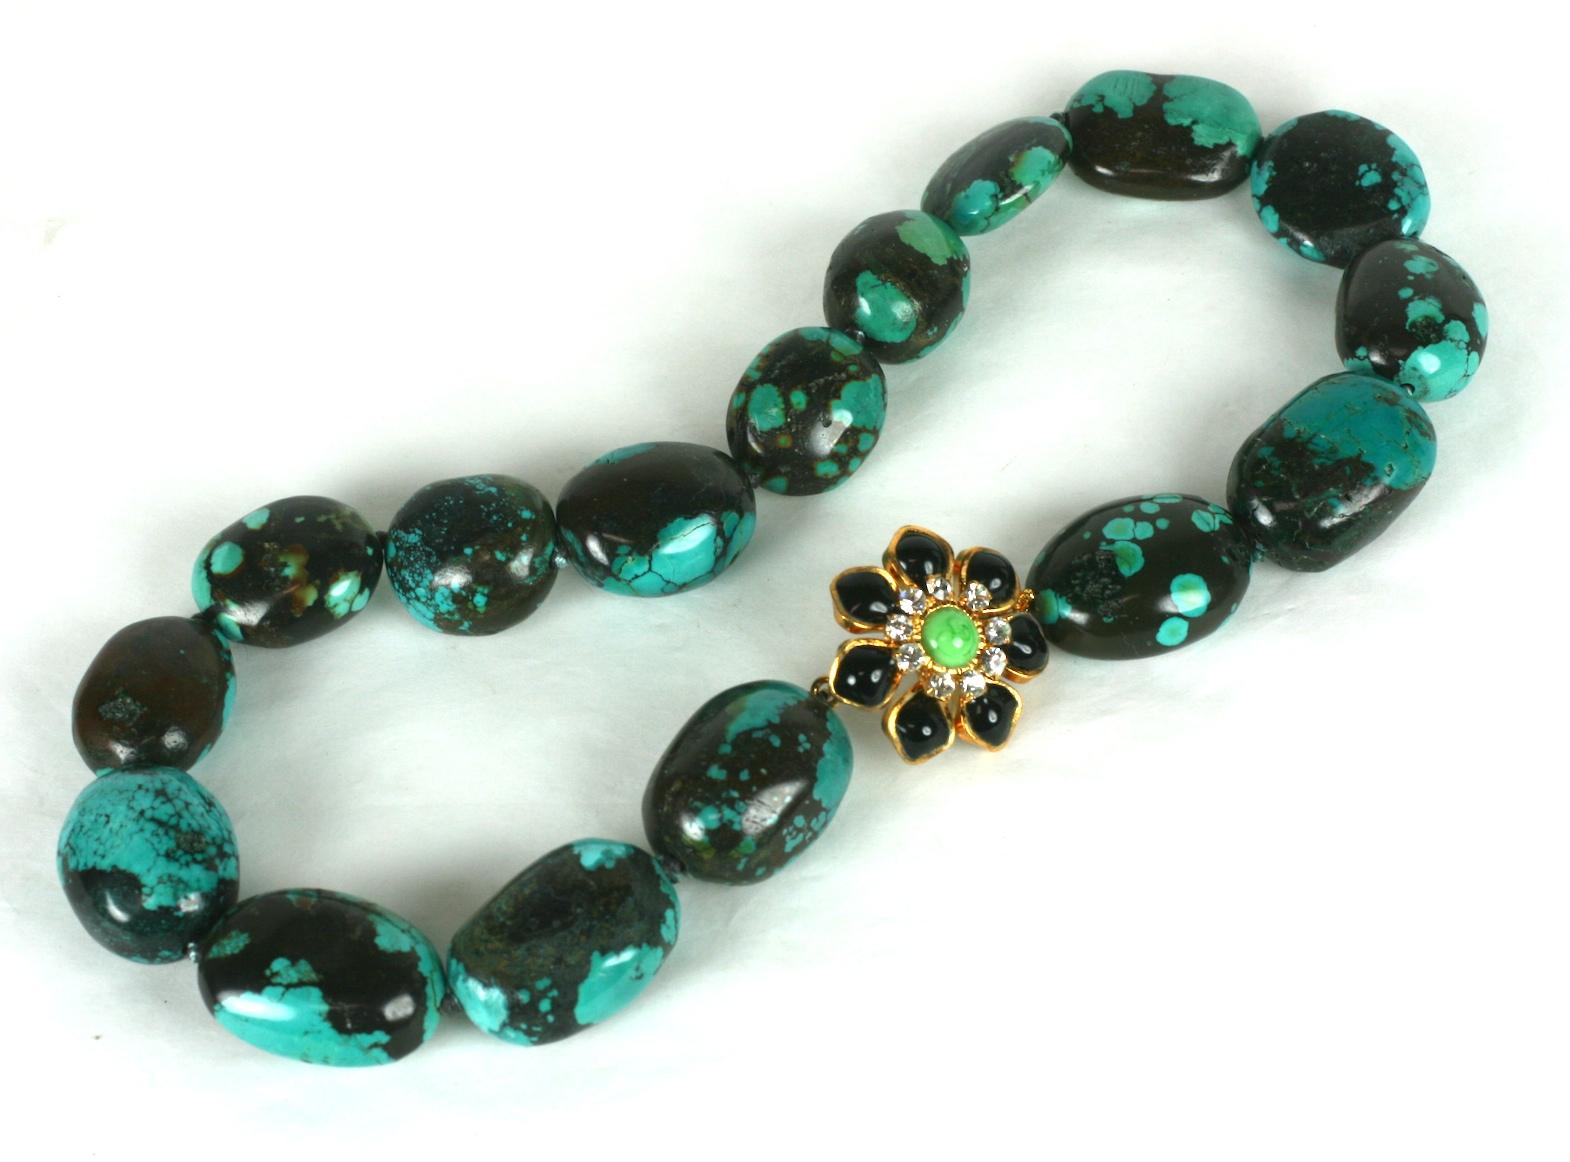 Artisan Matrix Turquoise and Poured Glass Marguerite Necklace, MWLC For Sale